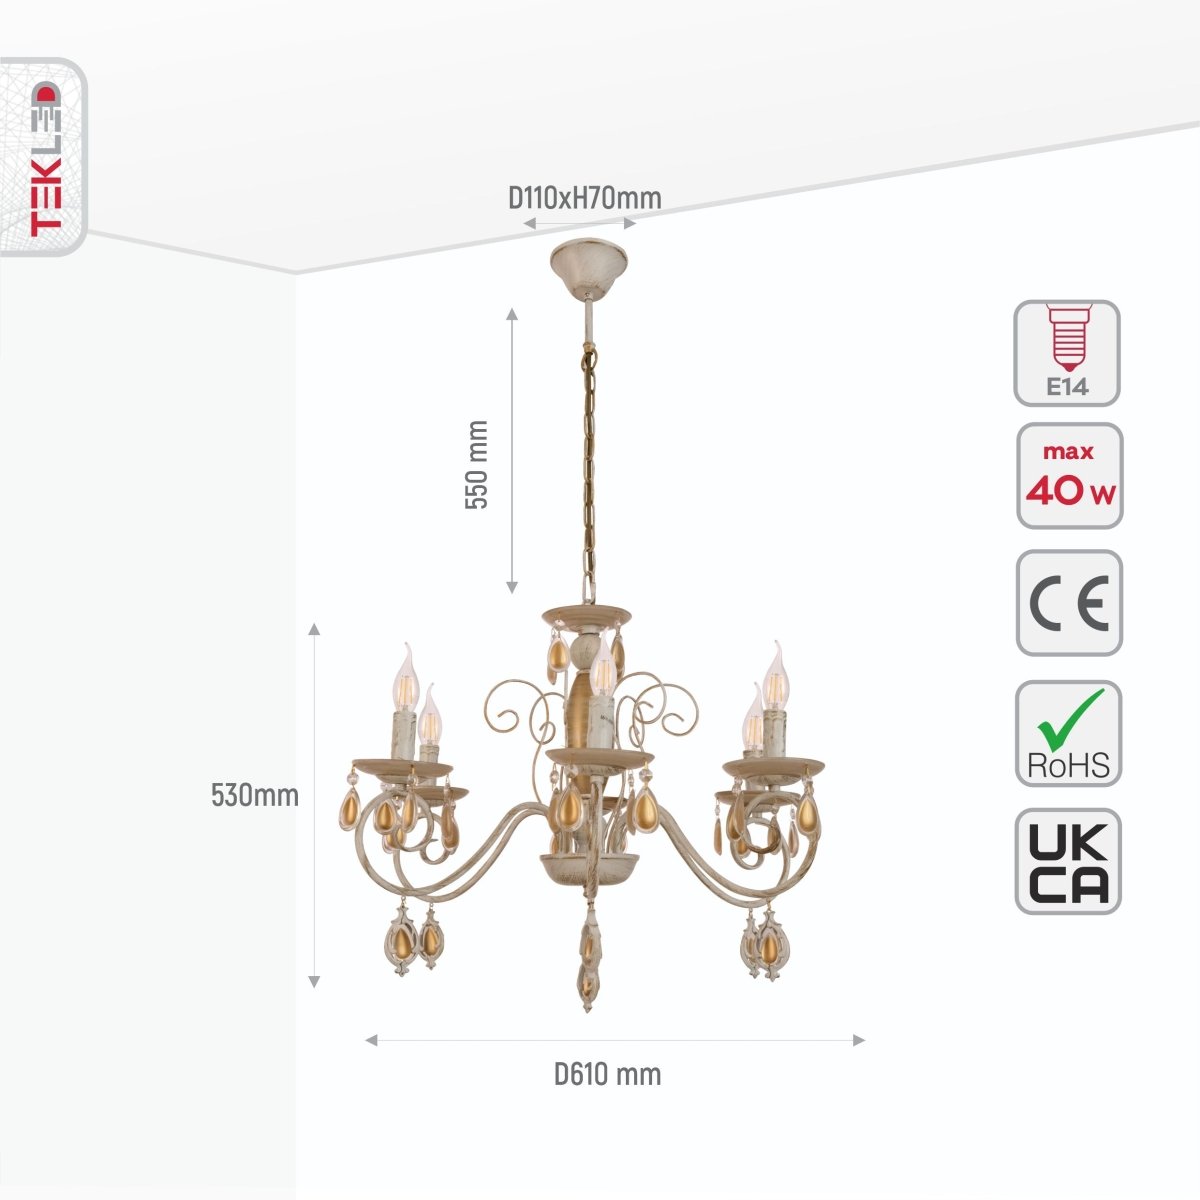 Size and specs of Amber Crystal Gold and White Metal 6 Arm Chandelier with E14 Fitting | TEKLED 158-19443